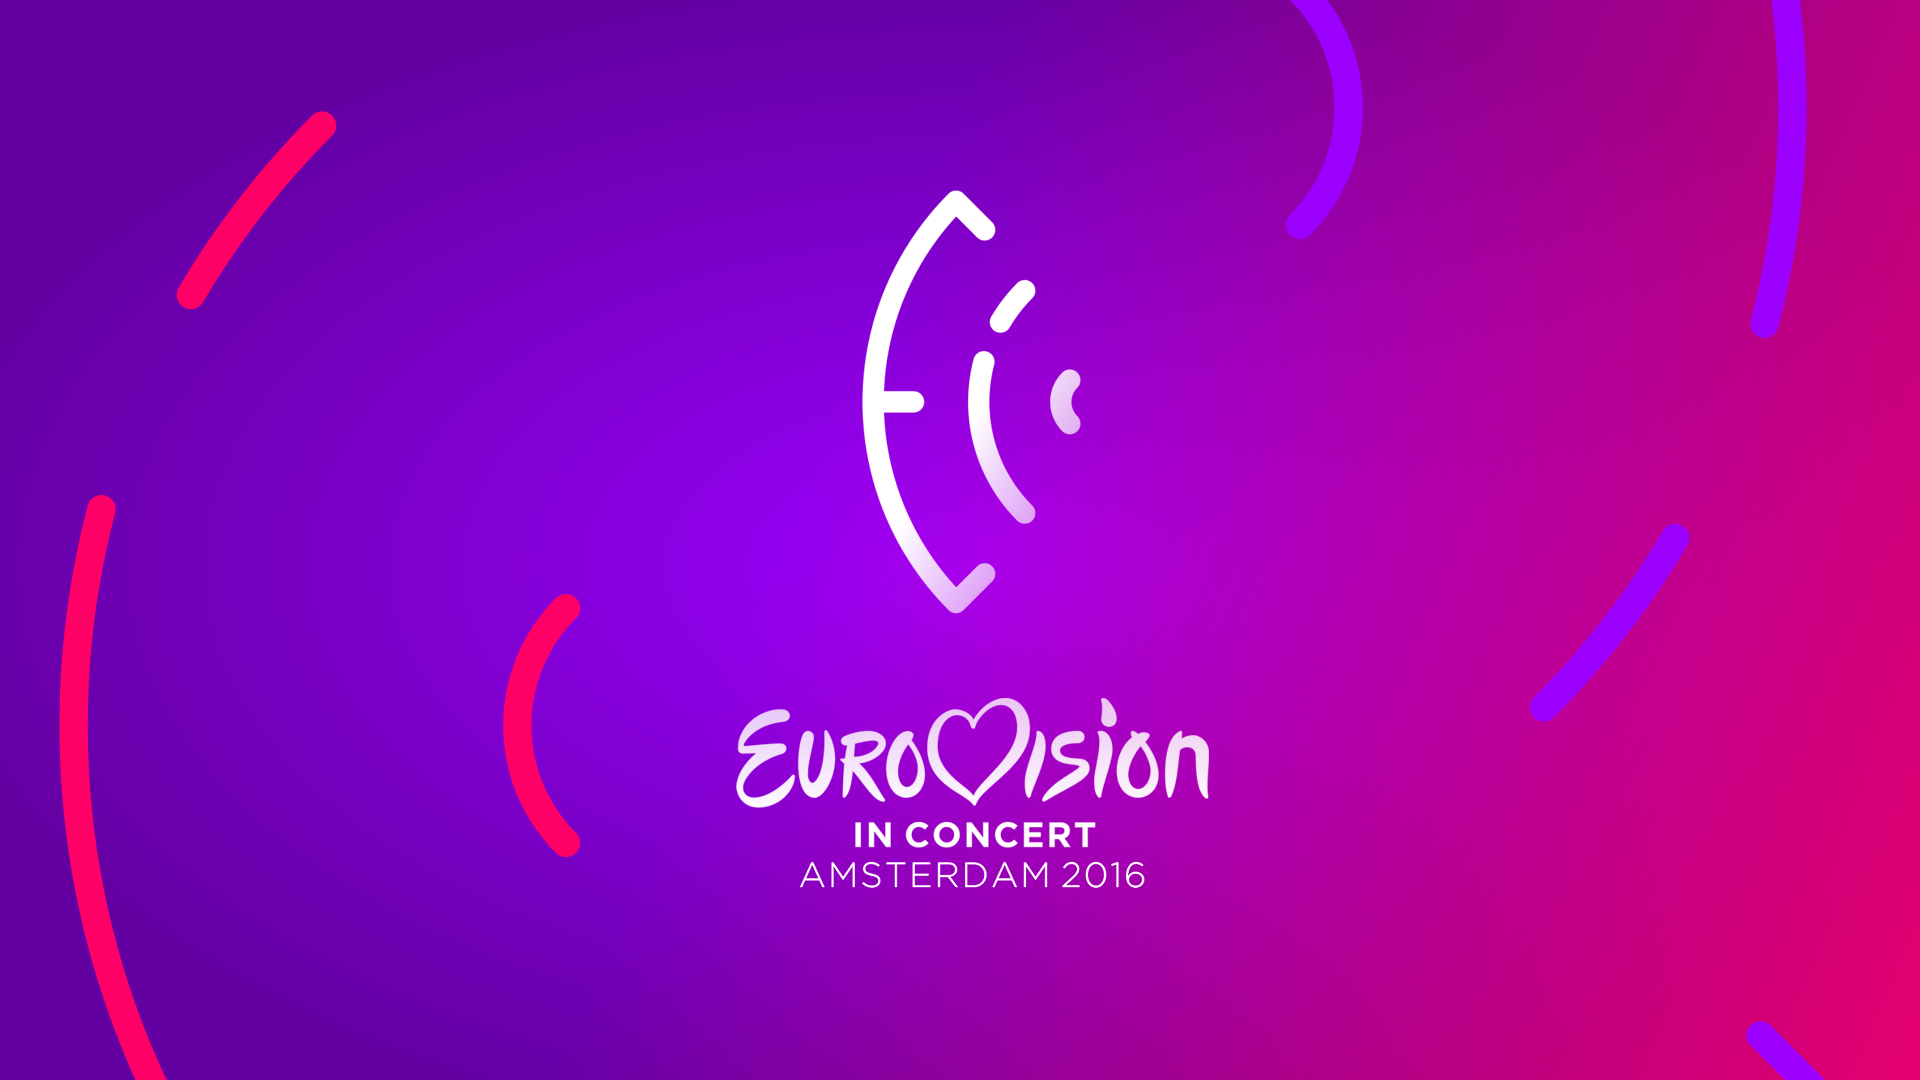 Eurovision in Concert boasts record number of performers (27)!